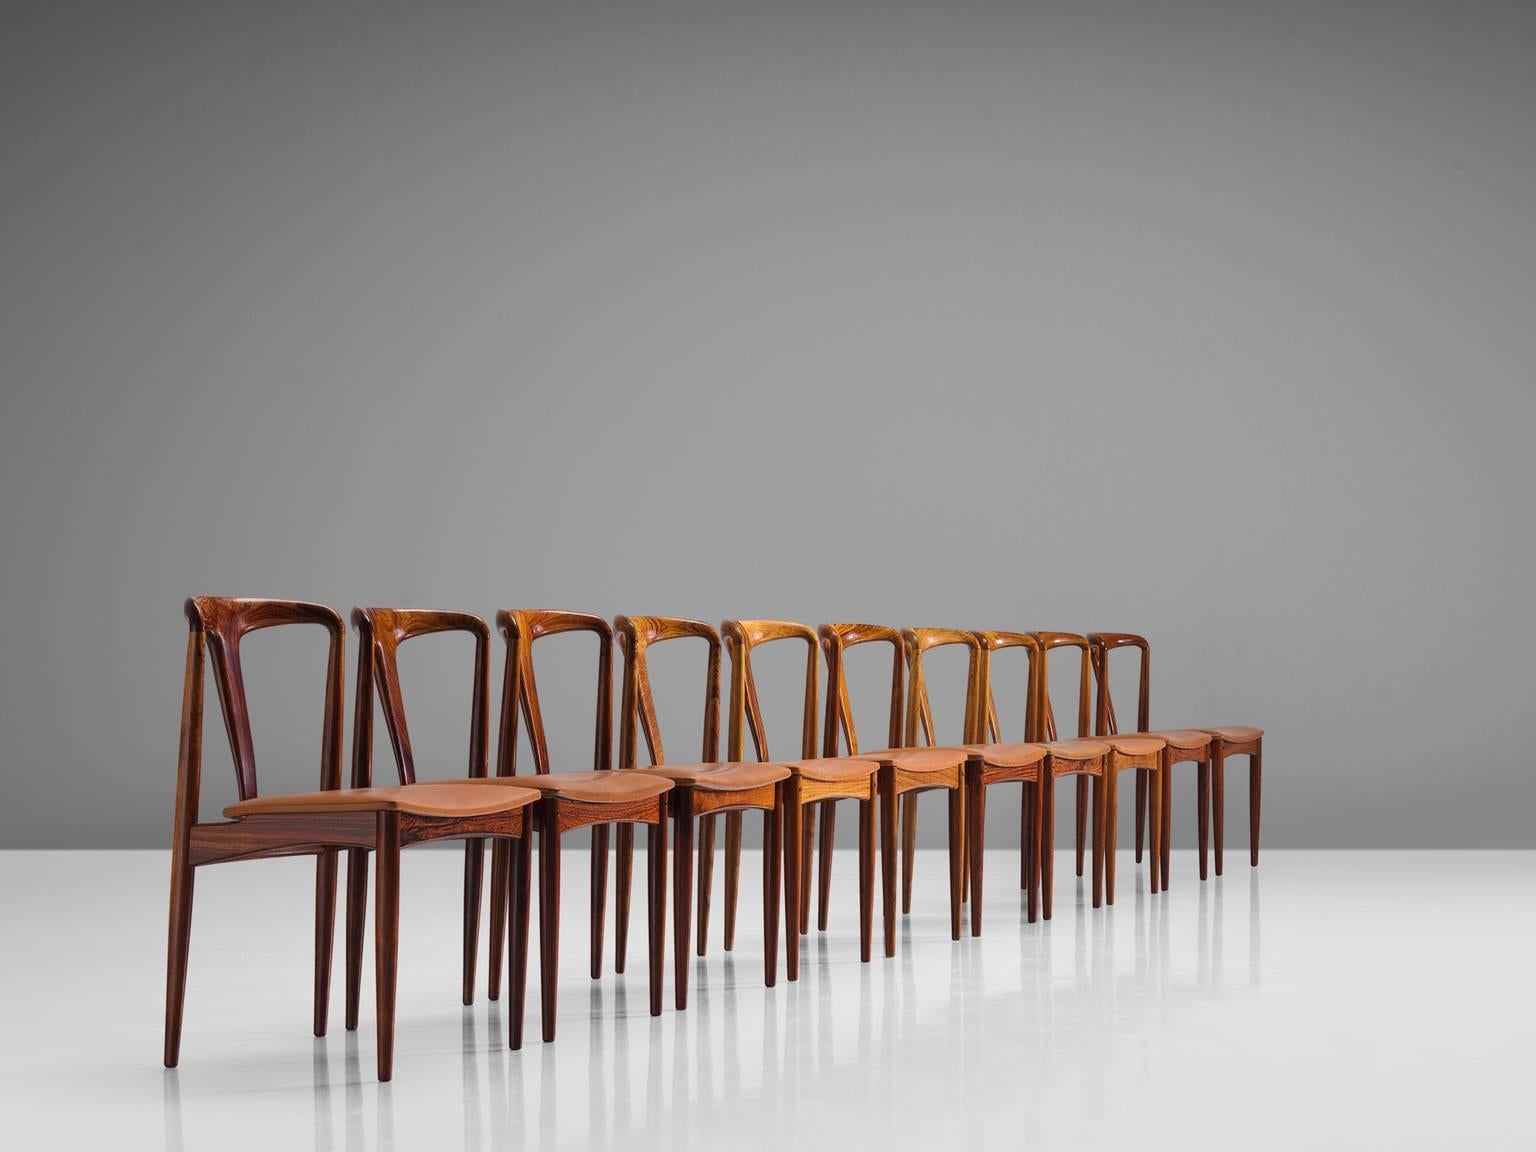 Johannes Andersen for Uldum Møbelfrabrik, rosewood, brown cognac leather, Denmark, 1960s.

This large set of dining chairs is designed by the Dane Johannes Andersen and produced by Uldum Møbelfrabrik in Denmark. The set is executed with rosewood